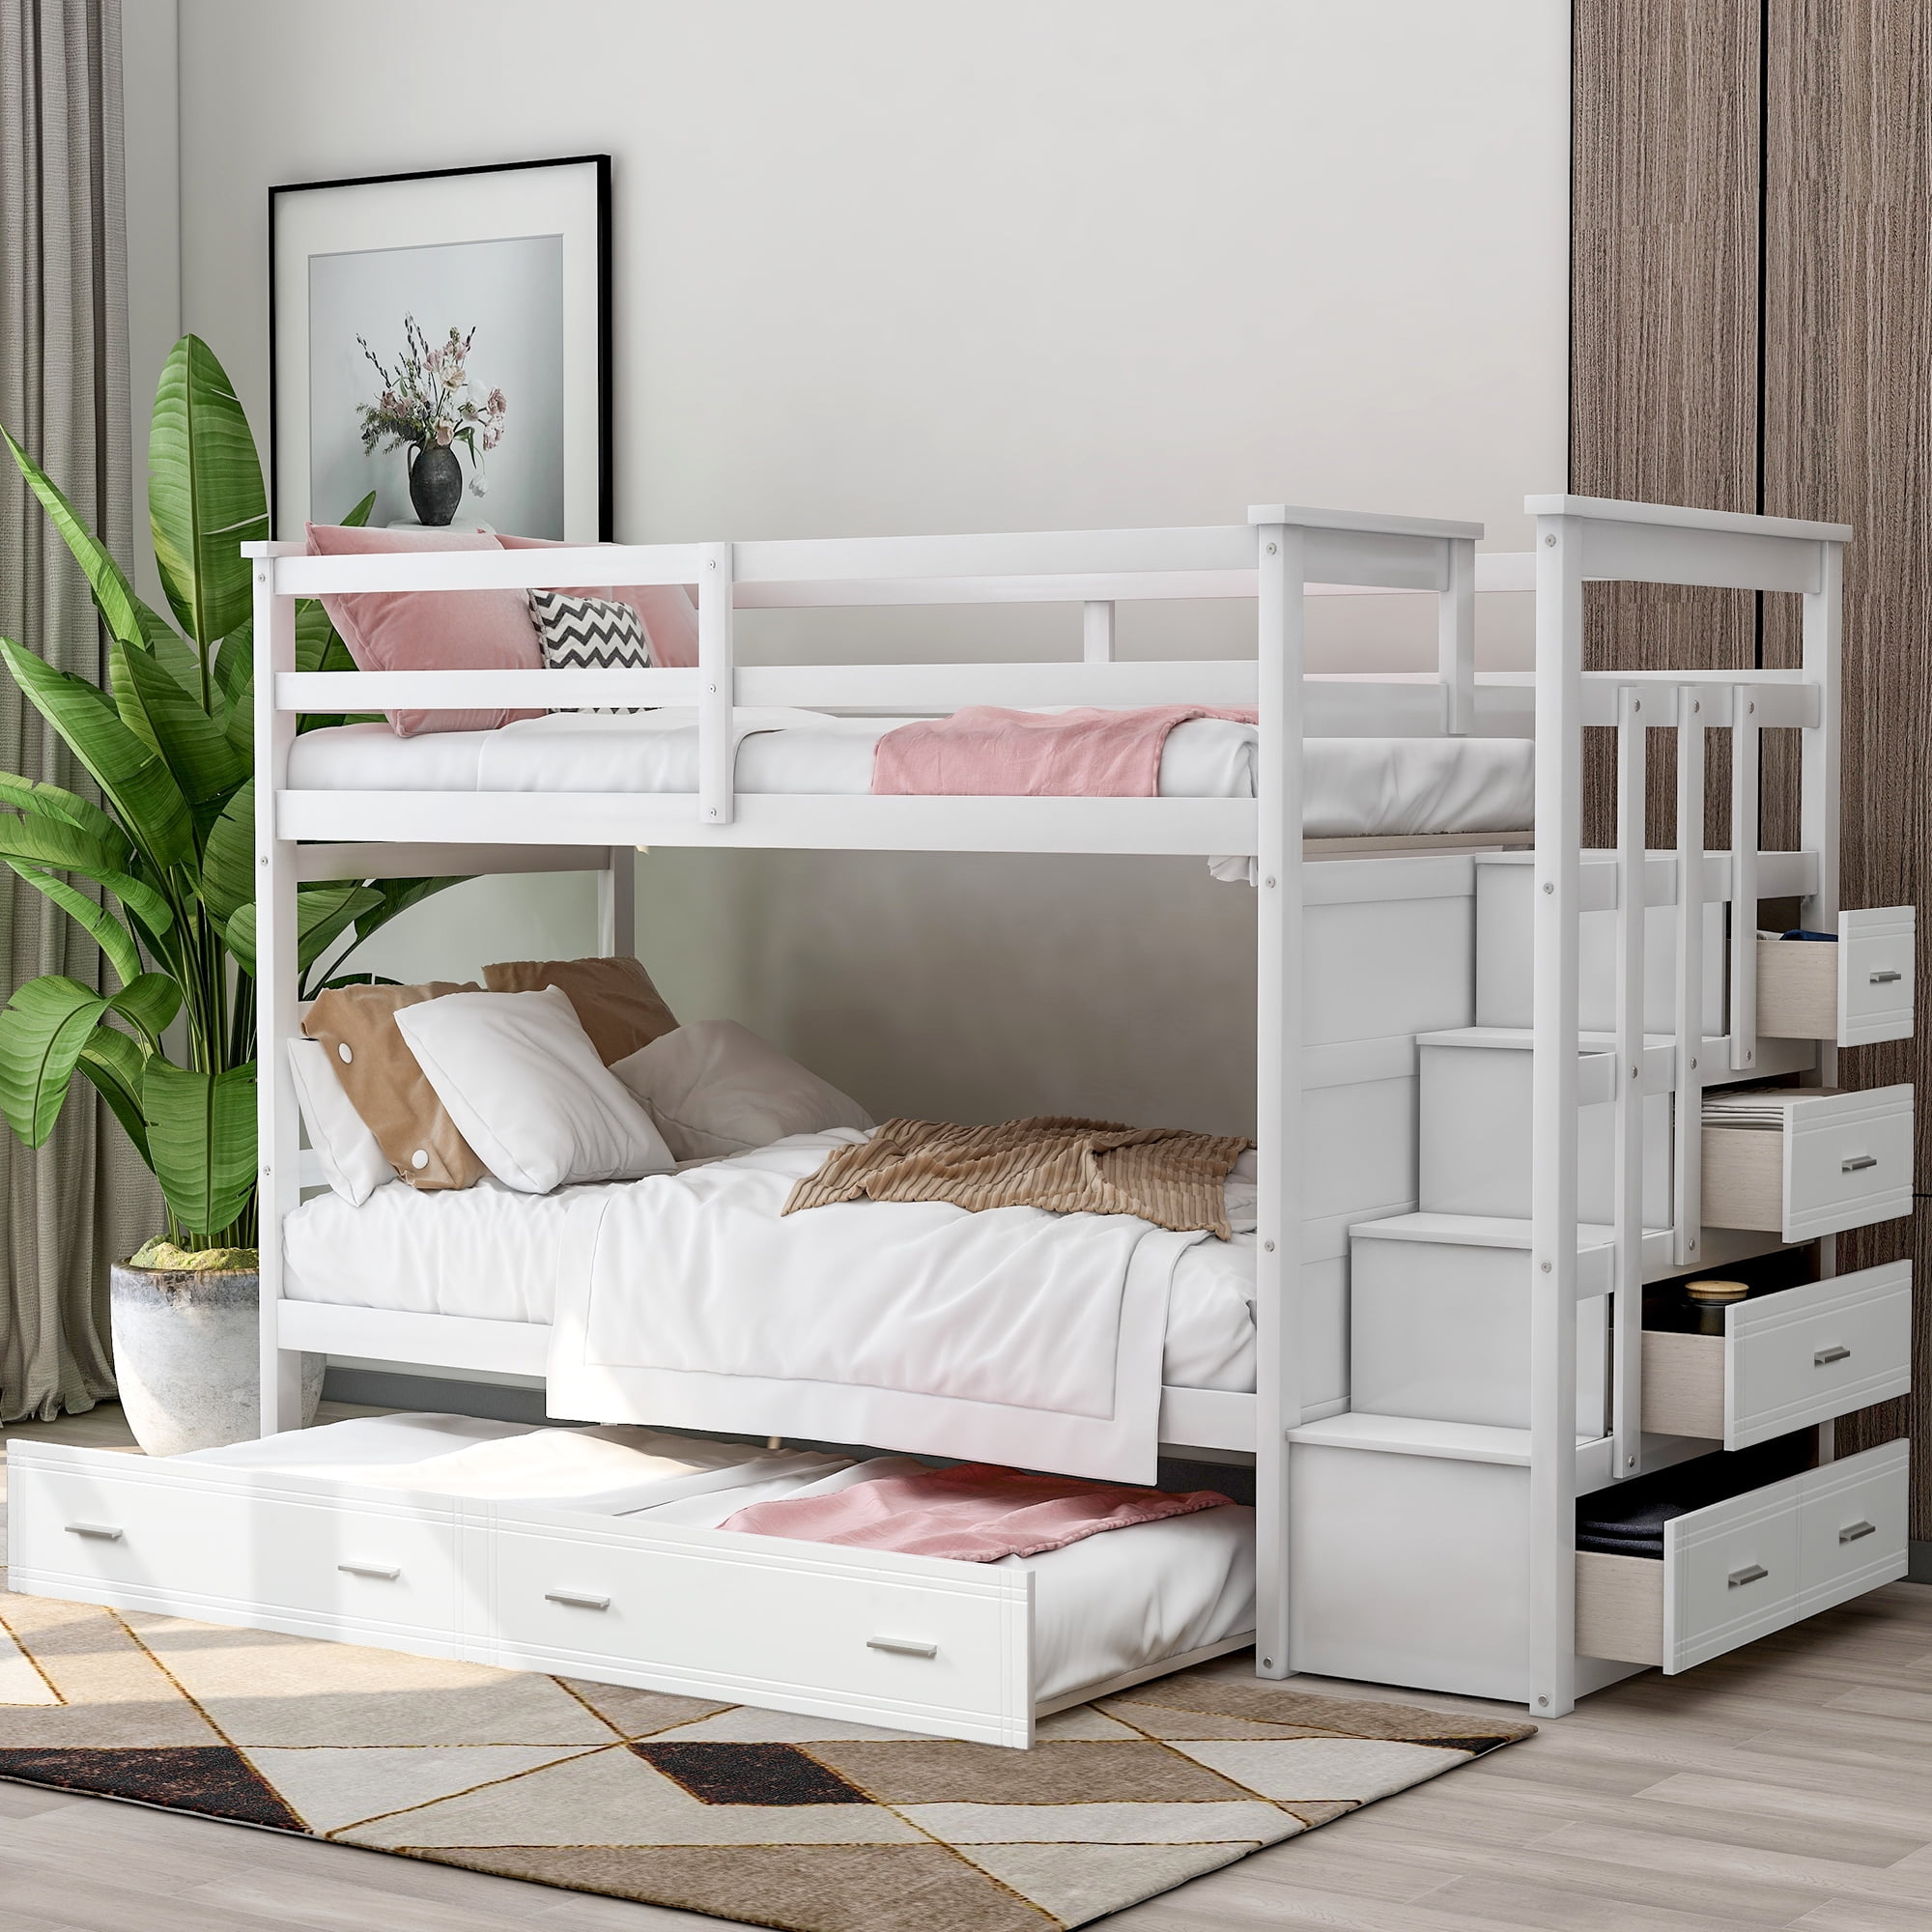 twin bunk beds with drawers